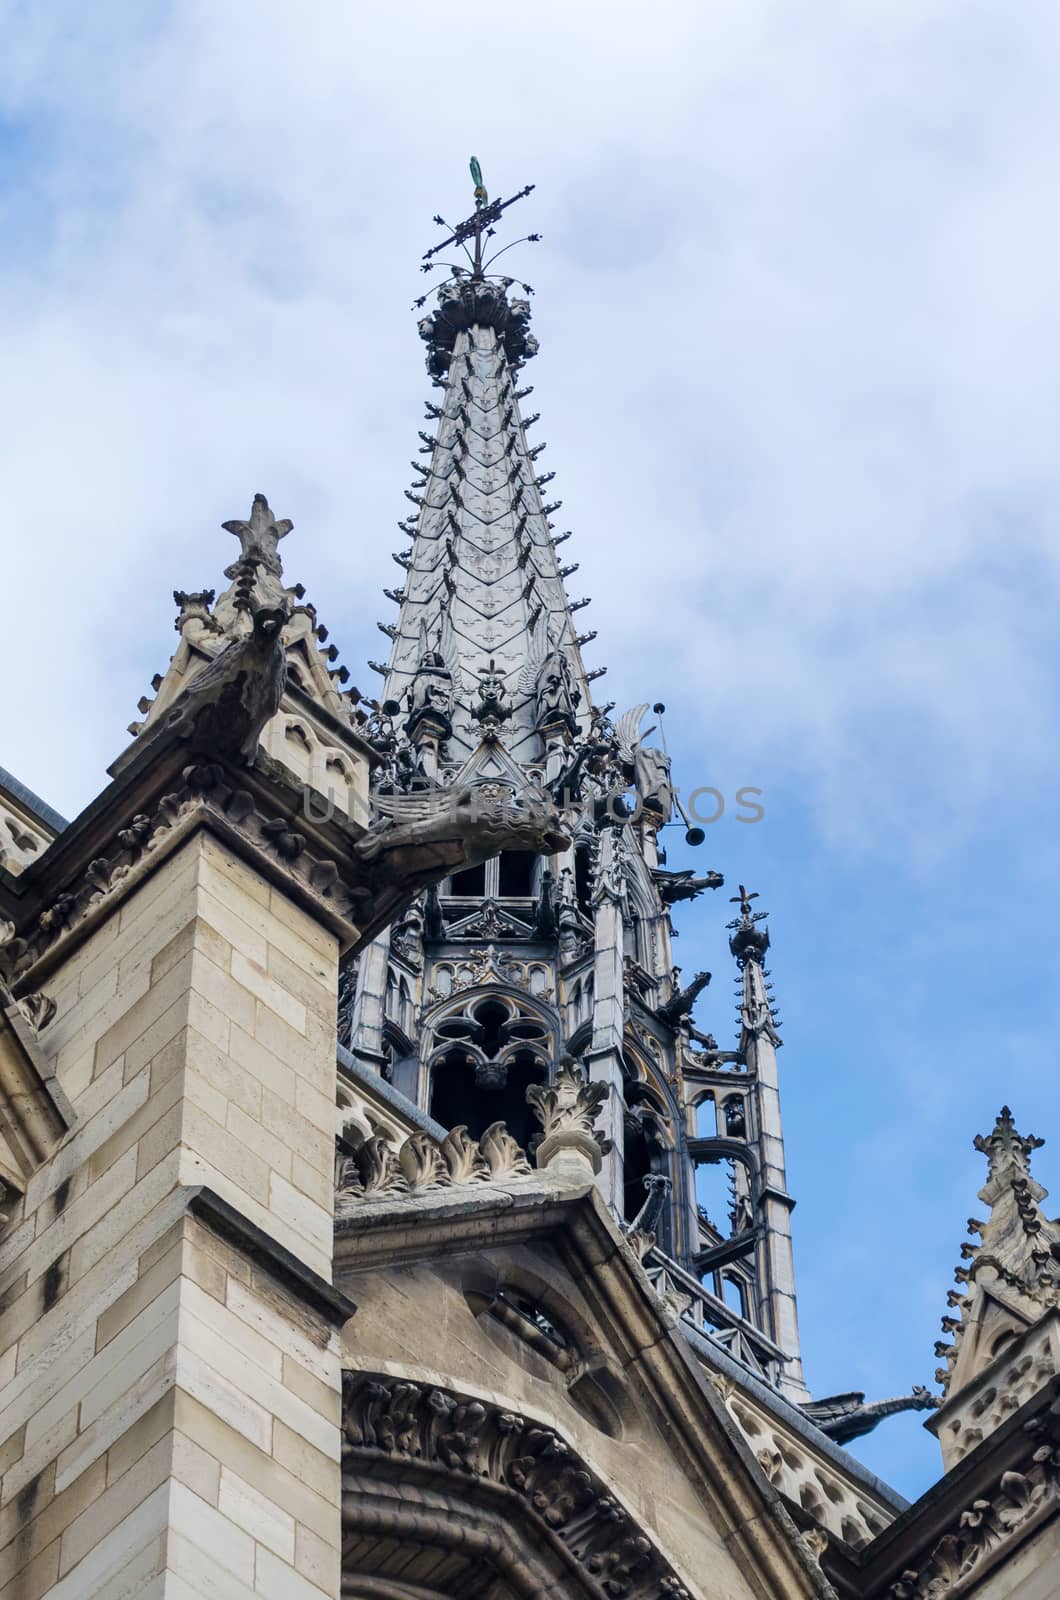 Sainte-Chapelle (The Holy Chapel) on the Cite island in Paris by siraanamwong